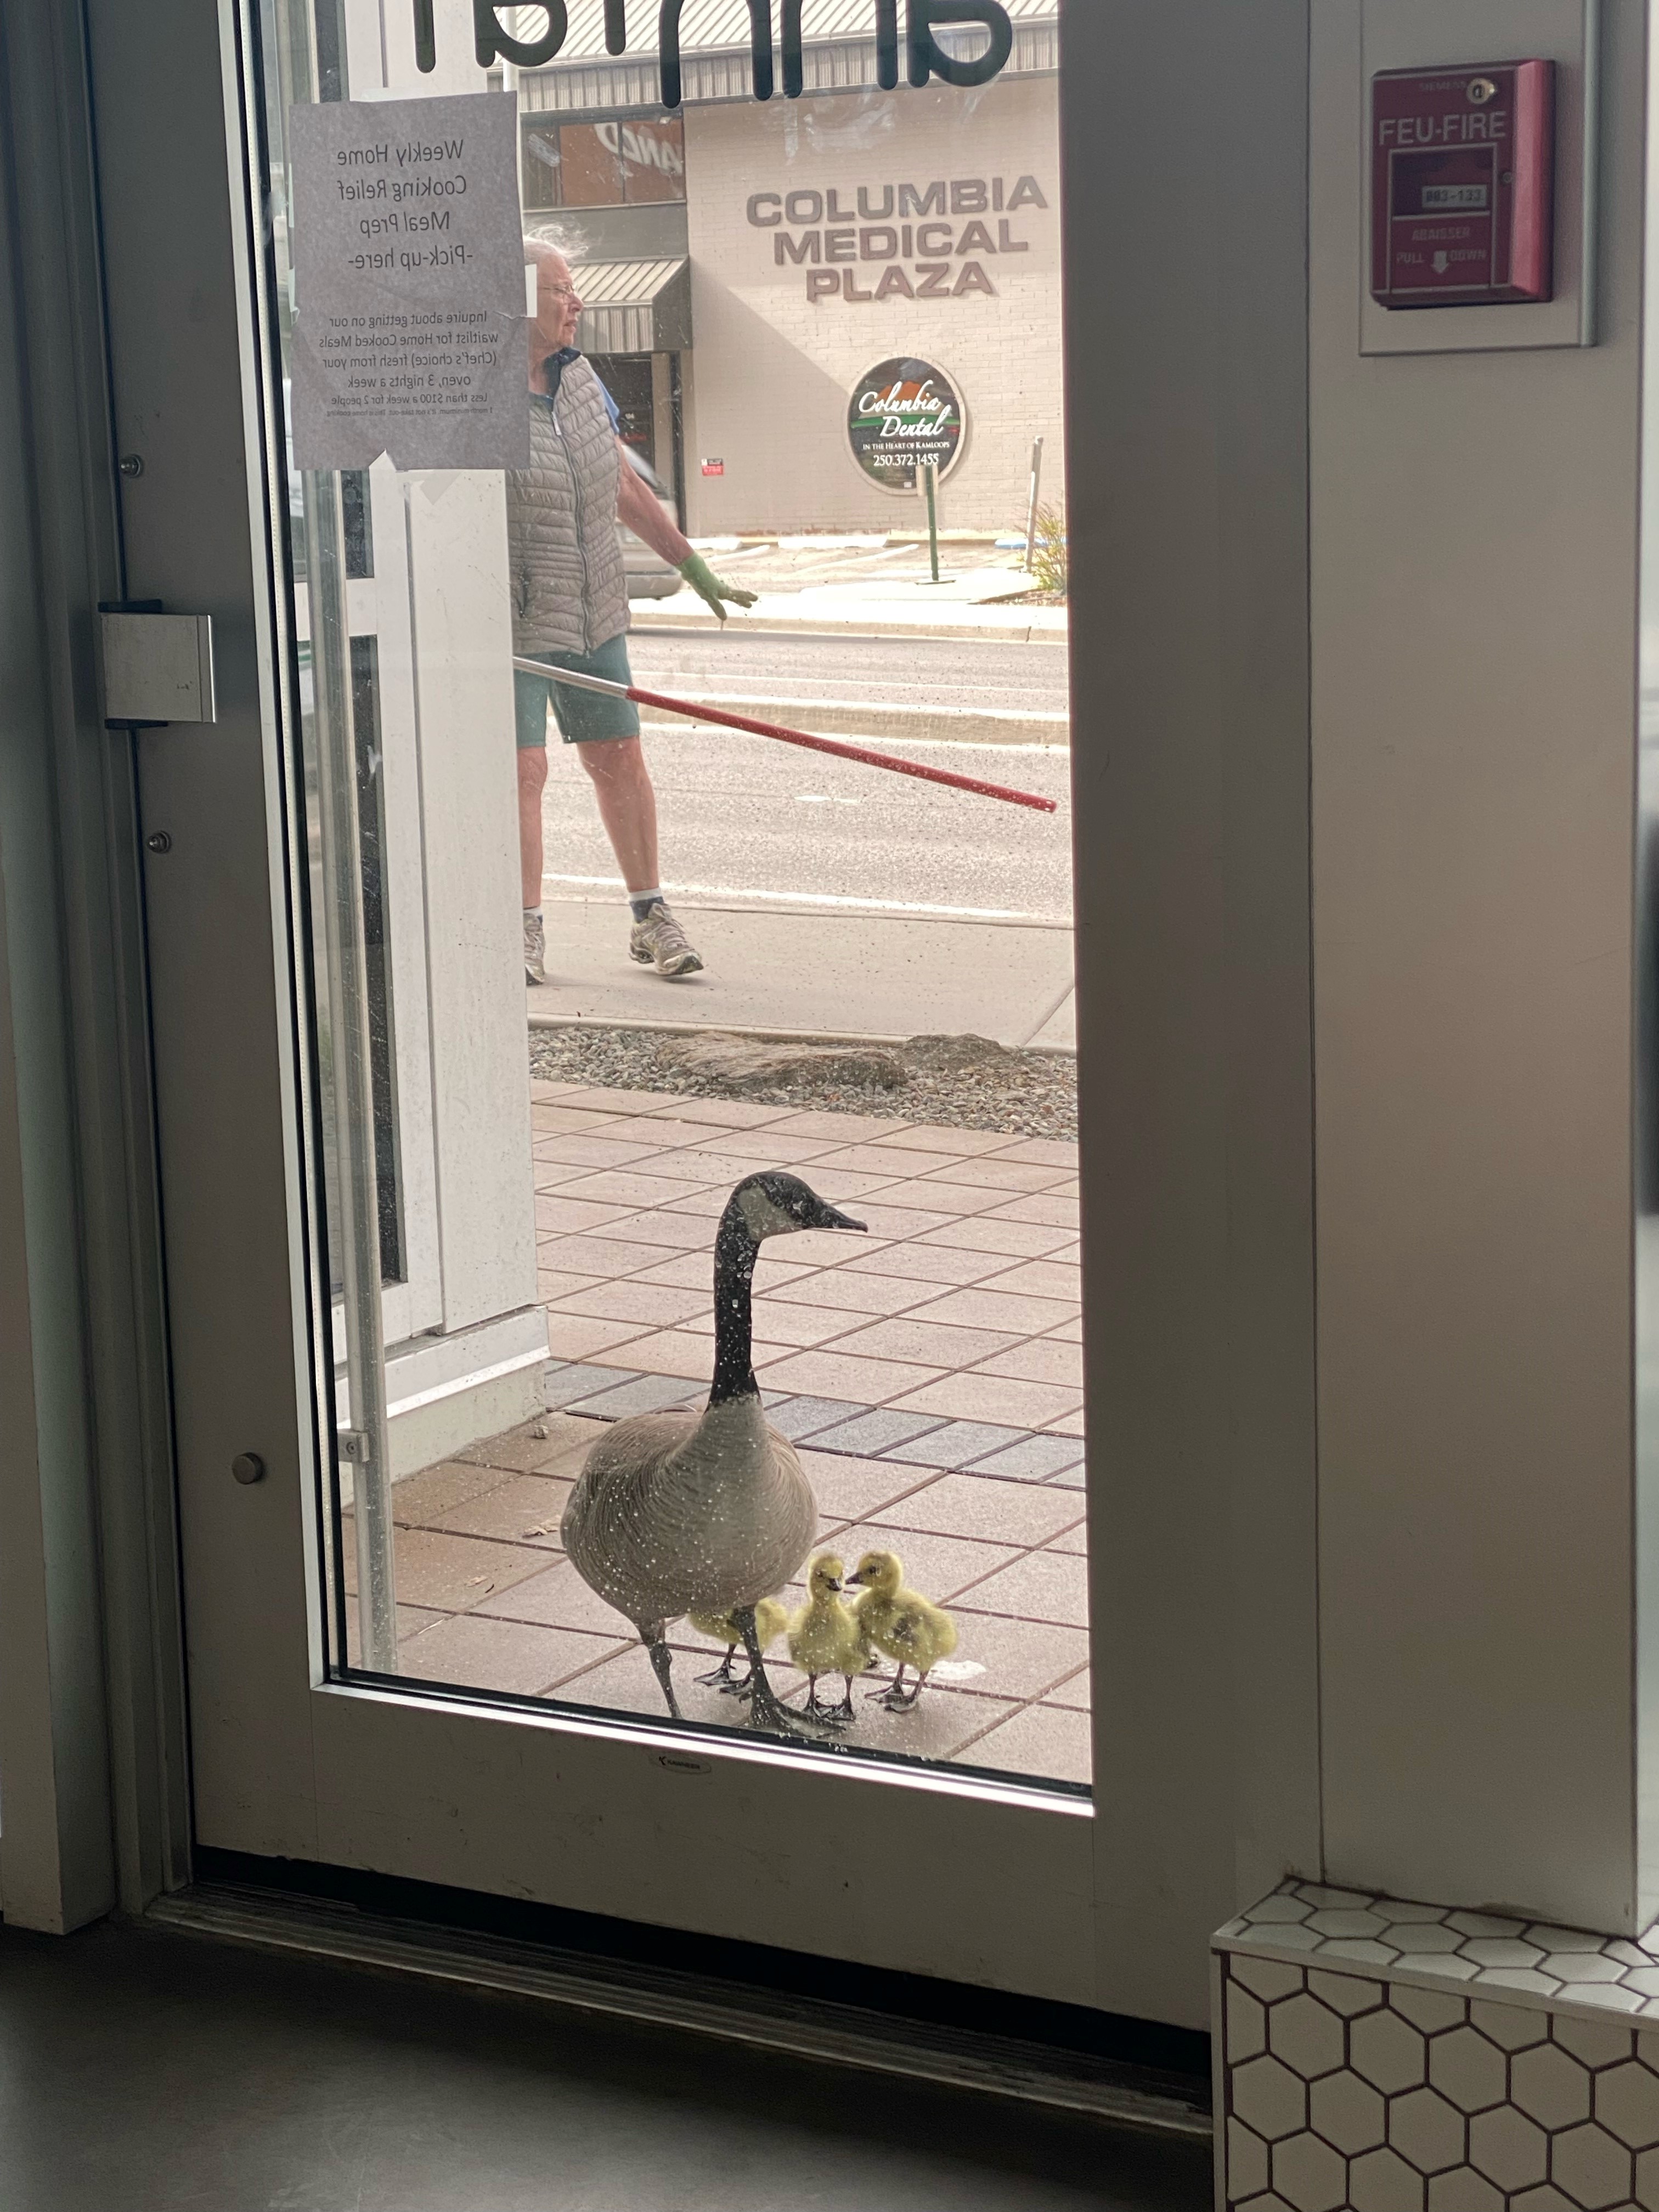 Geese outside a cafe.